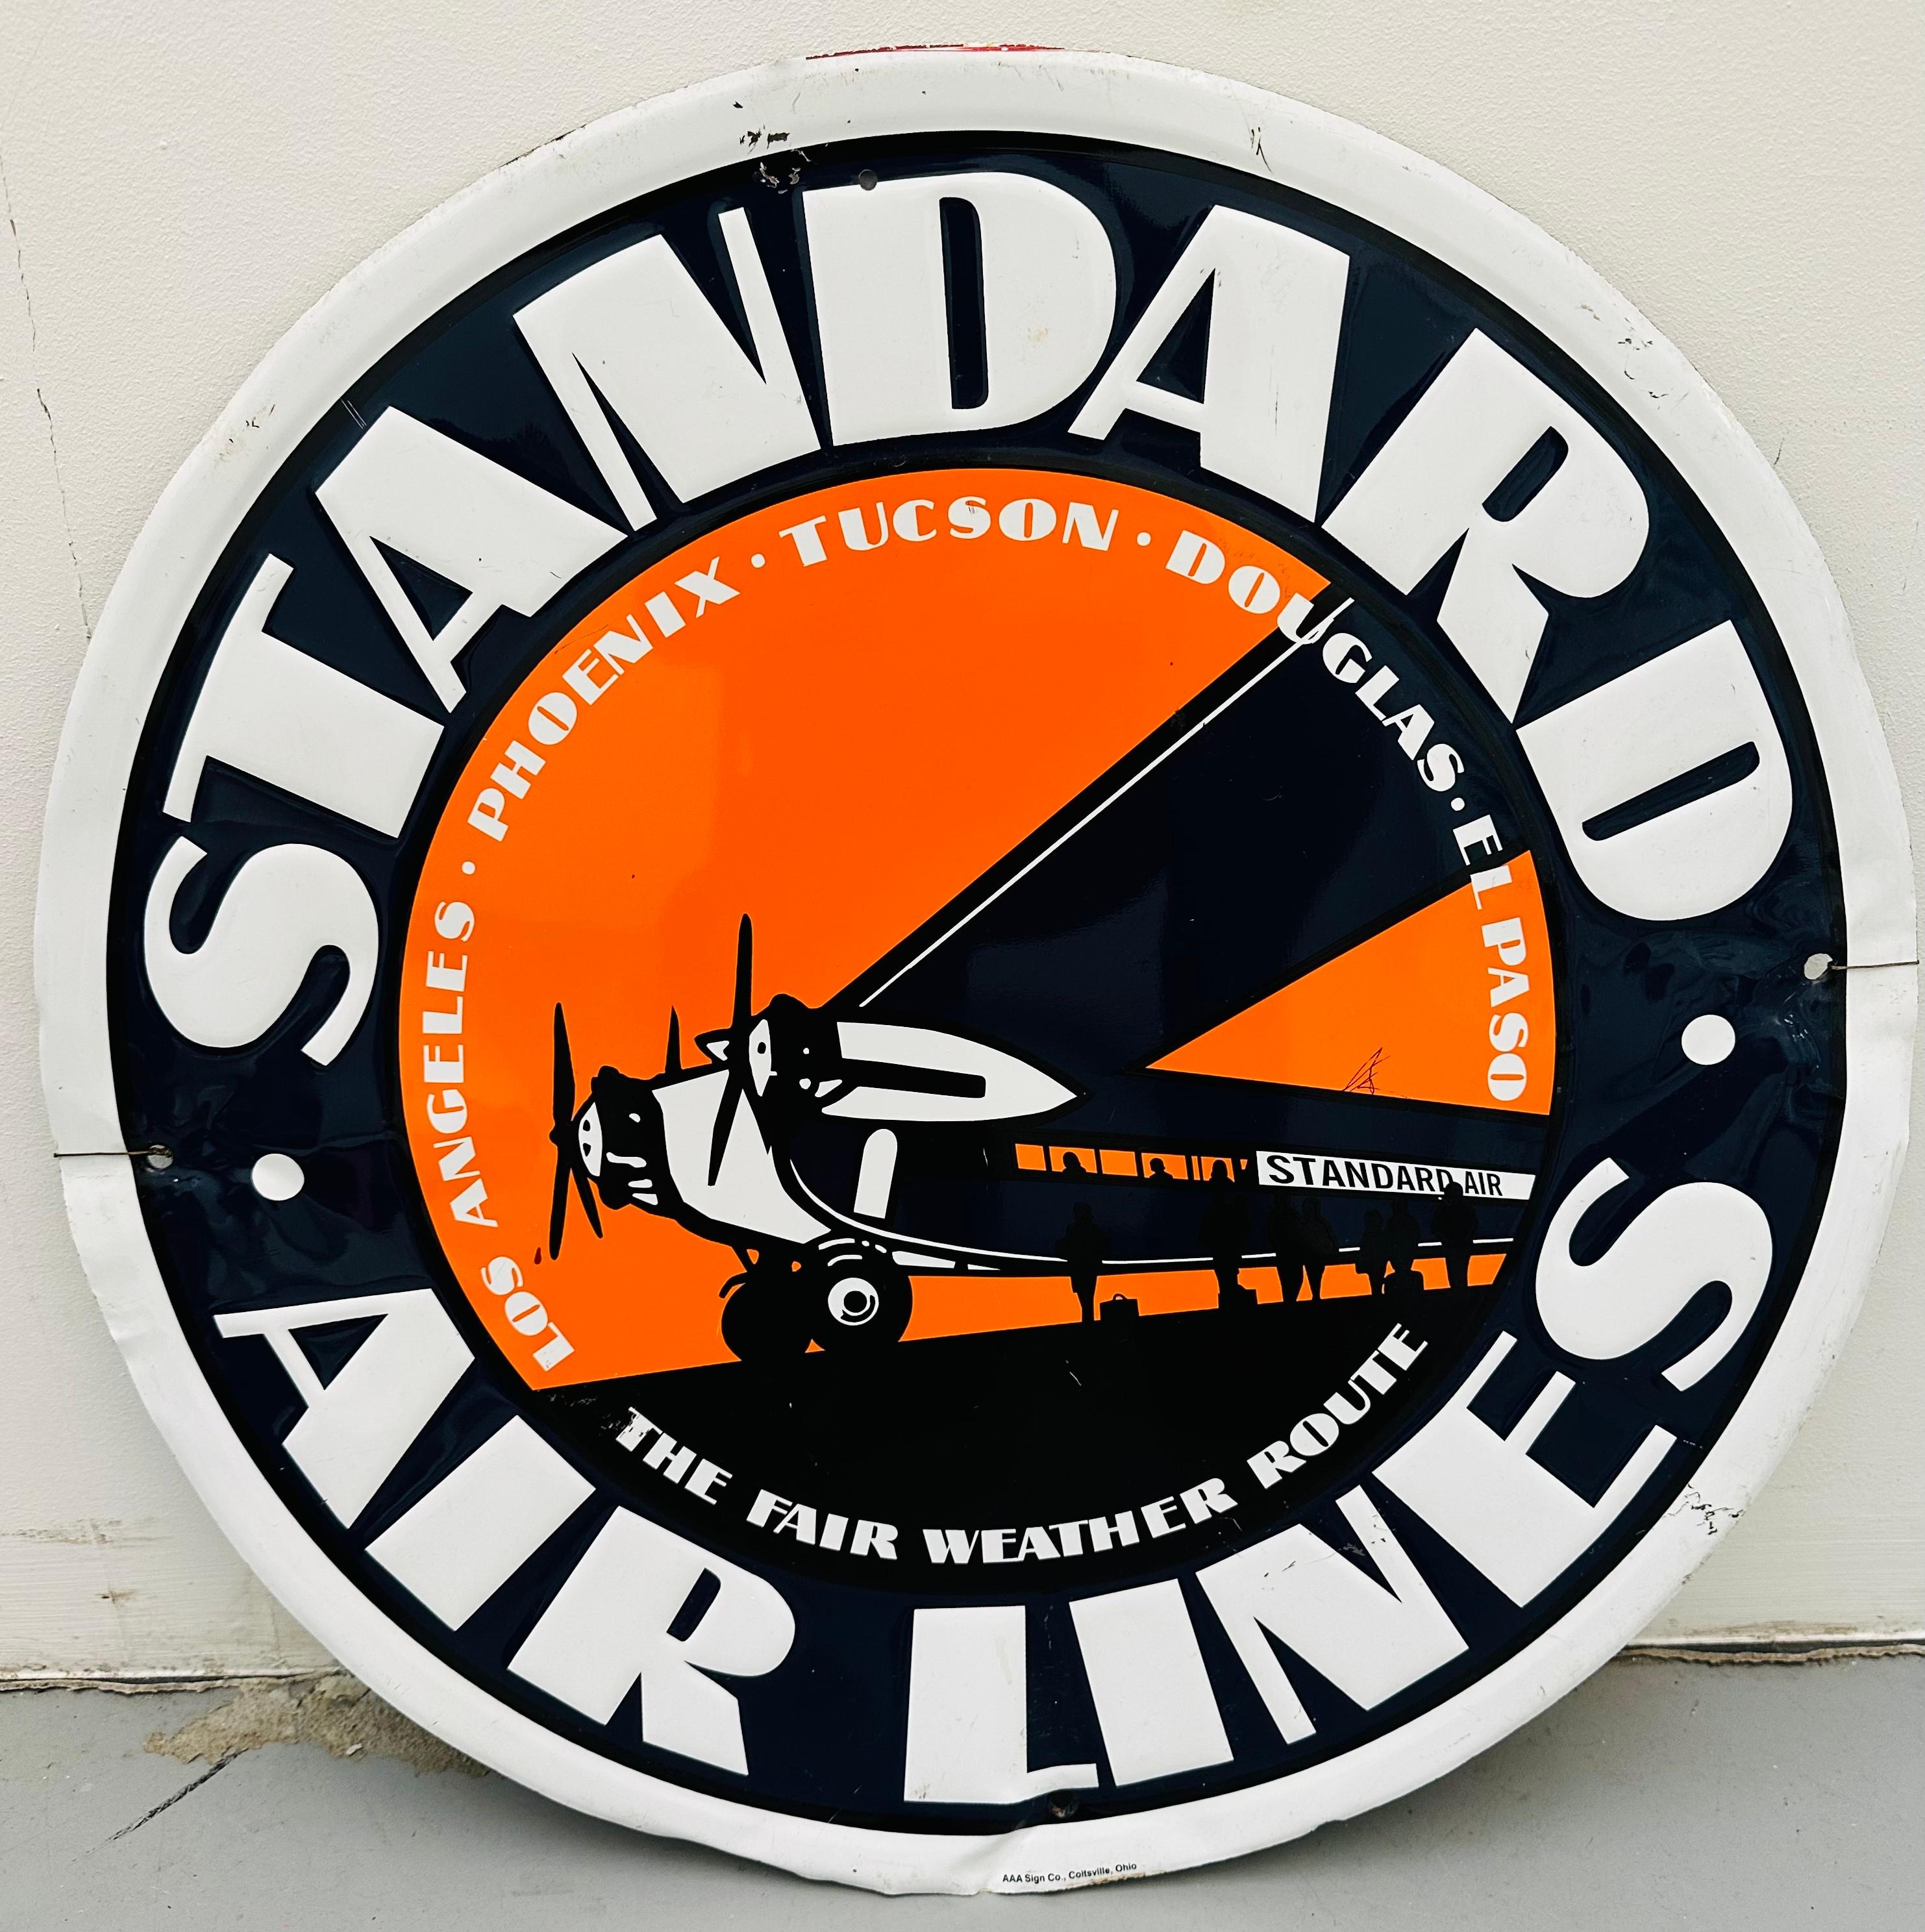 A vintage circa 1950s circular enamelled tin metal advertising sign for Standard Air Lines.  In worn vintage condition as illustrated in the images. In 1929 it merged with Western Air Express as Transcontinental & Western Air. I am making an